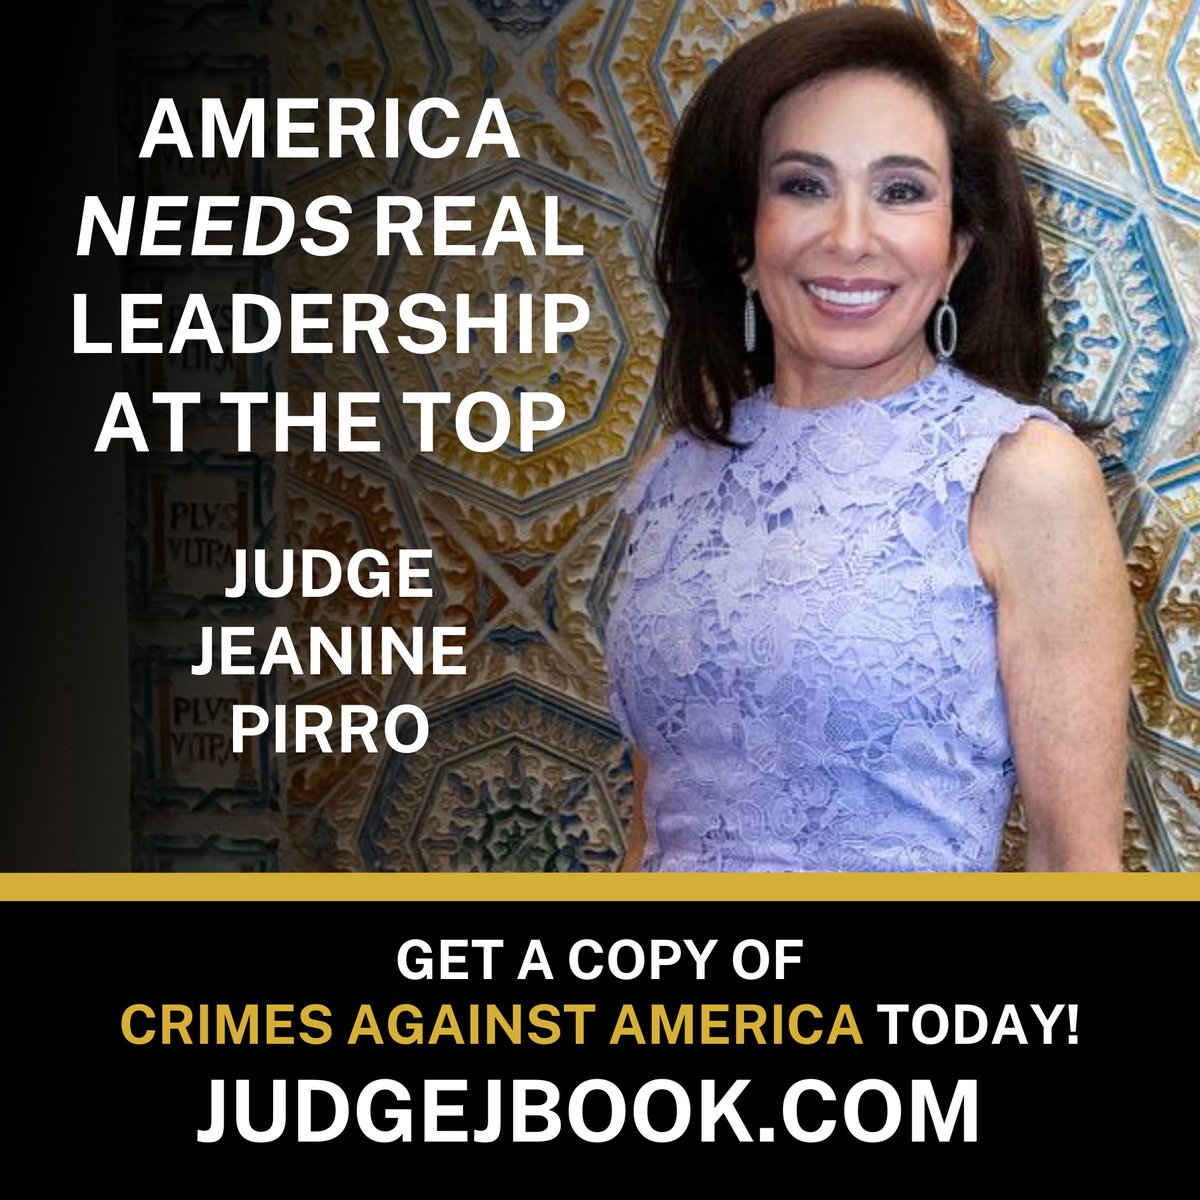 Go to WINNINGPUBLISHING.com today to get your copy of @JudgeJeanine's new book!